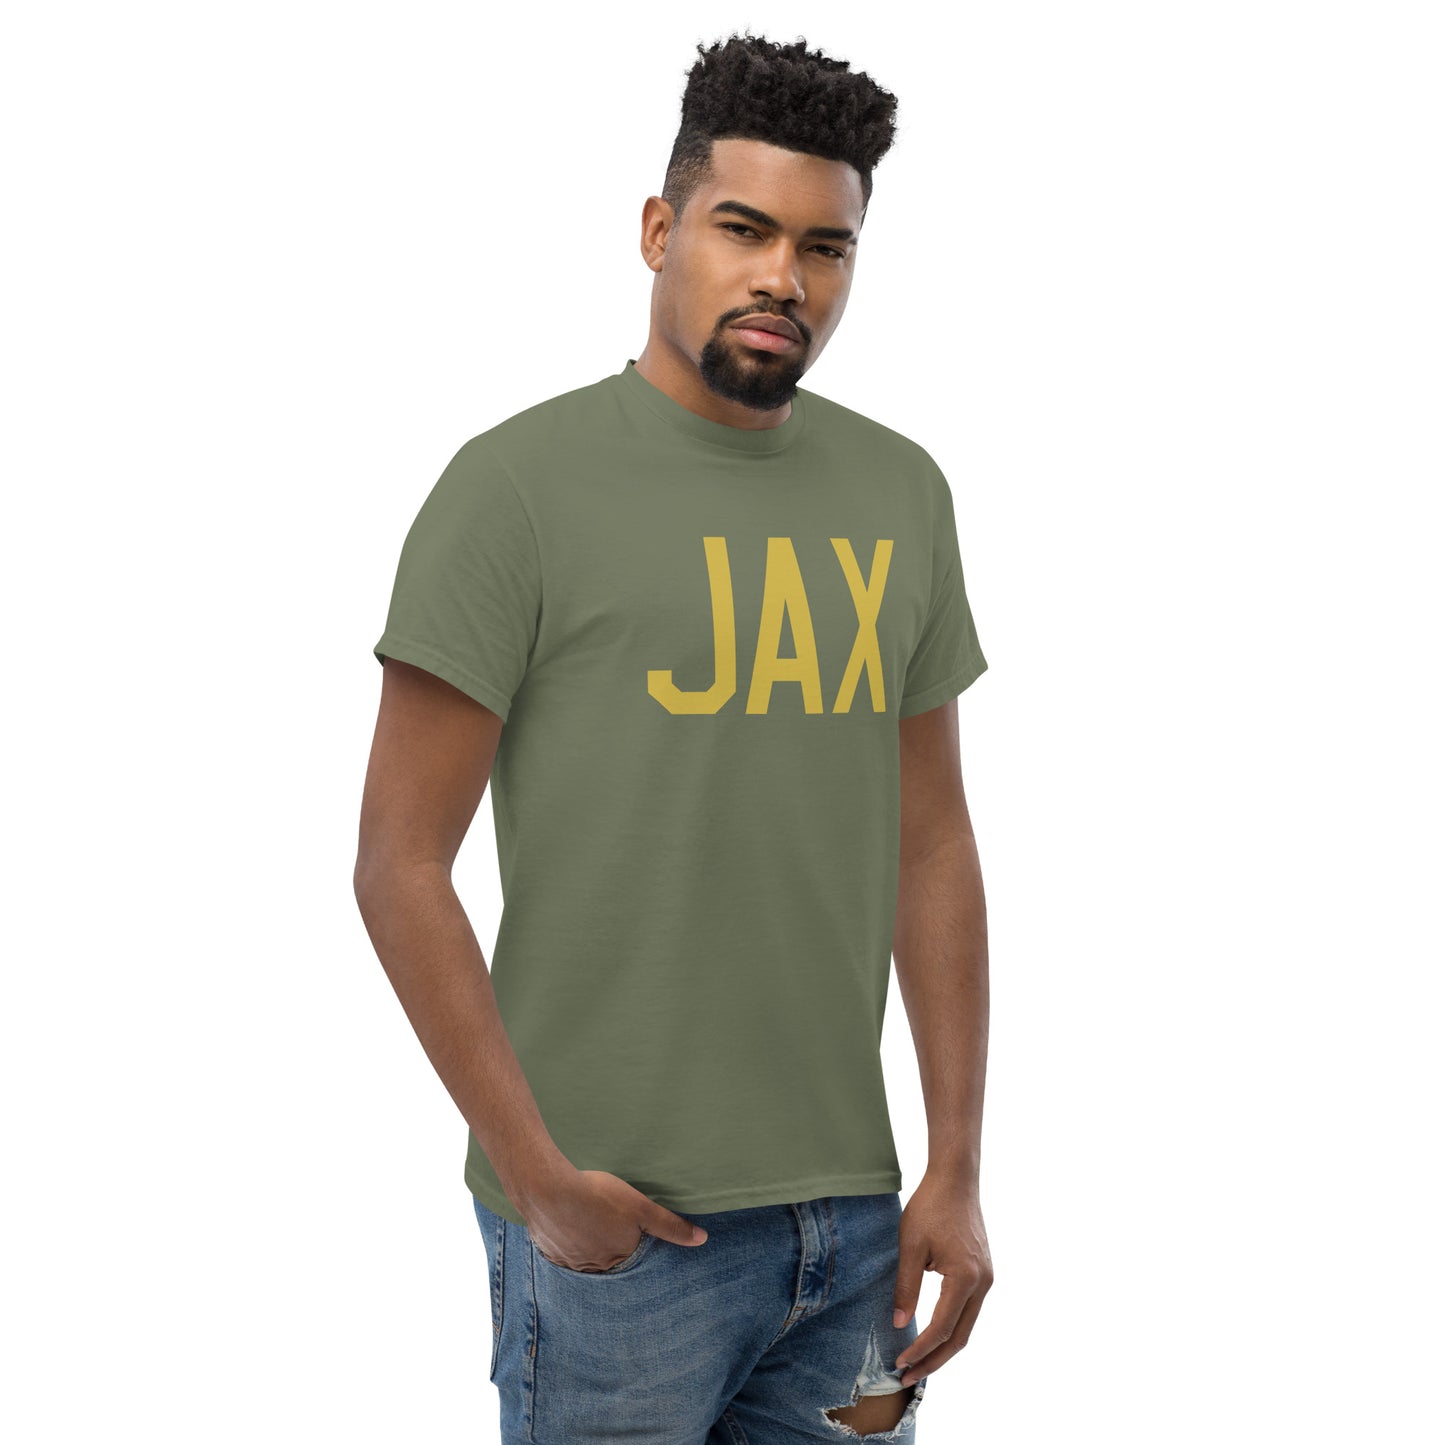 Aviation Enthusiast Men's Tee - Old Gold Graphic • JAX Jacksonville • YHM Designs - Image 08